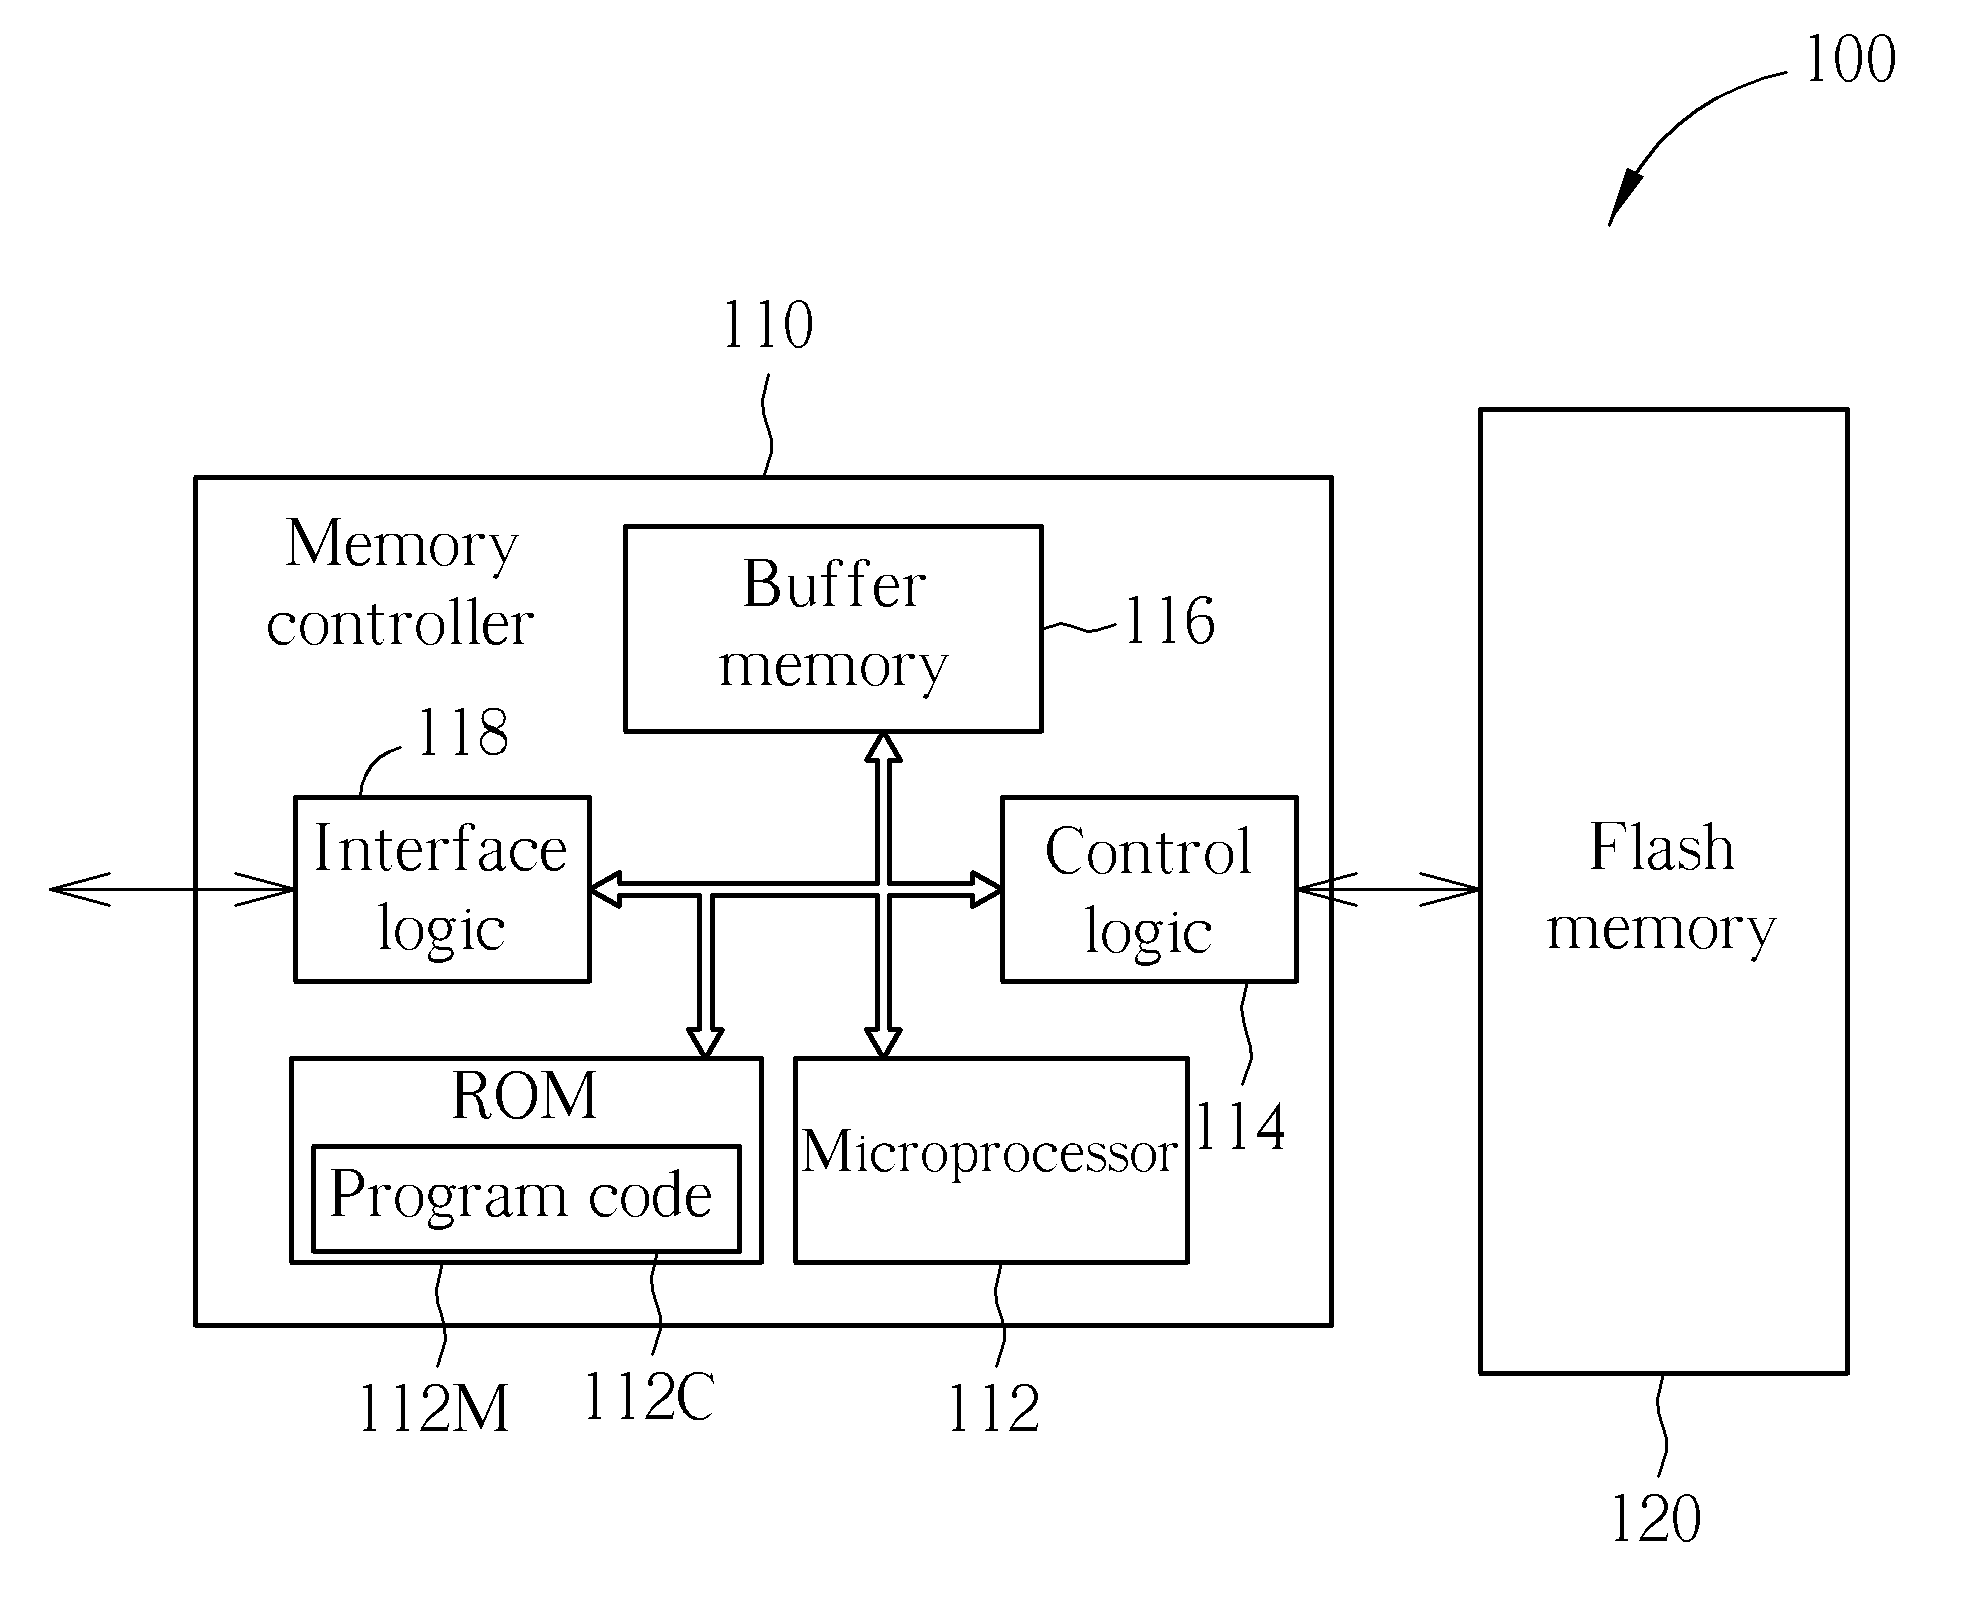 Method for establishing a communication channel between a host device and a memory device, associated memory device and controller thereof, and associated host device and host device application